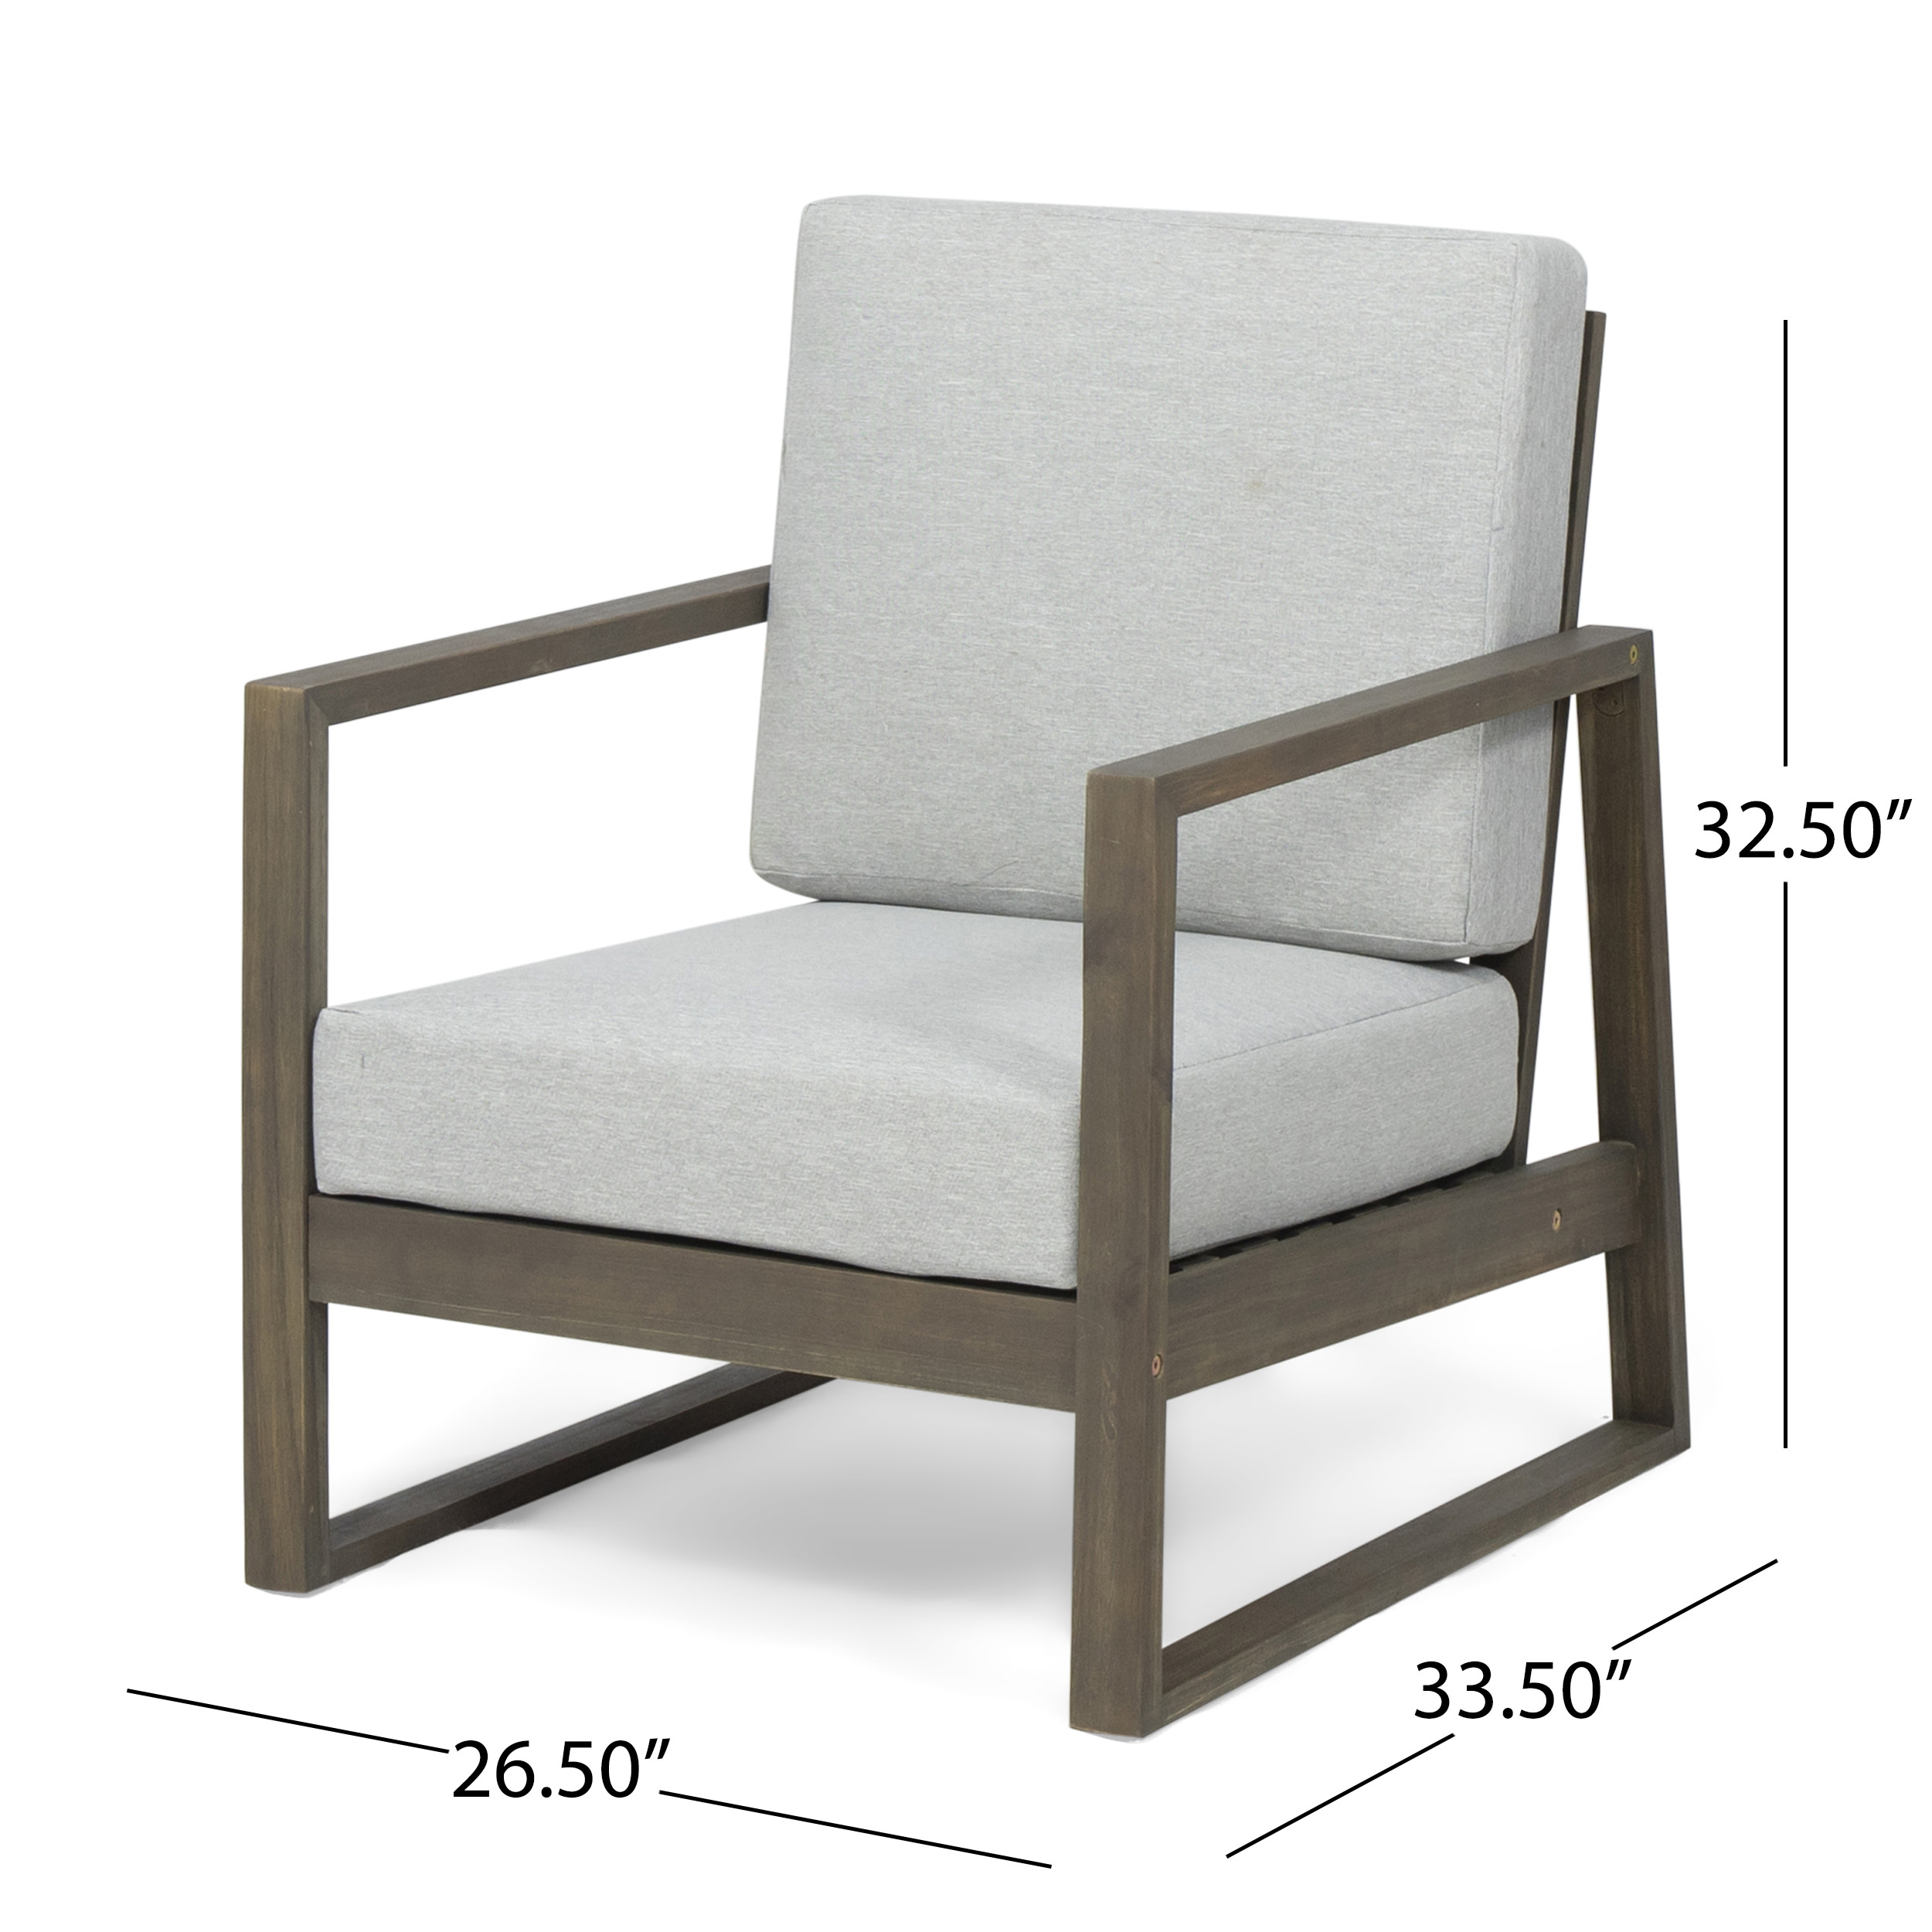 Eclipse Acacia Wood Outdoor Club Chair with Cushion, Gray and Light Gray - image 2 of 7